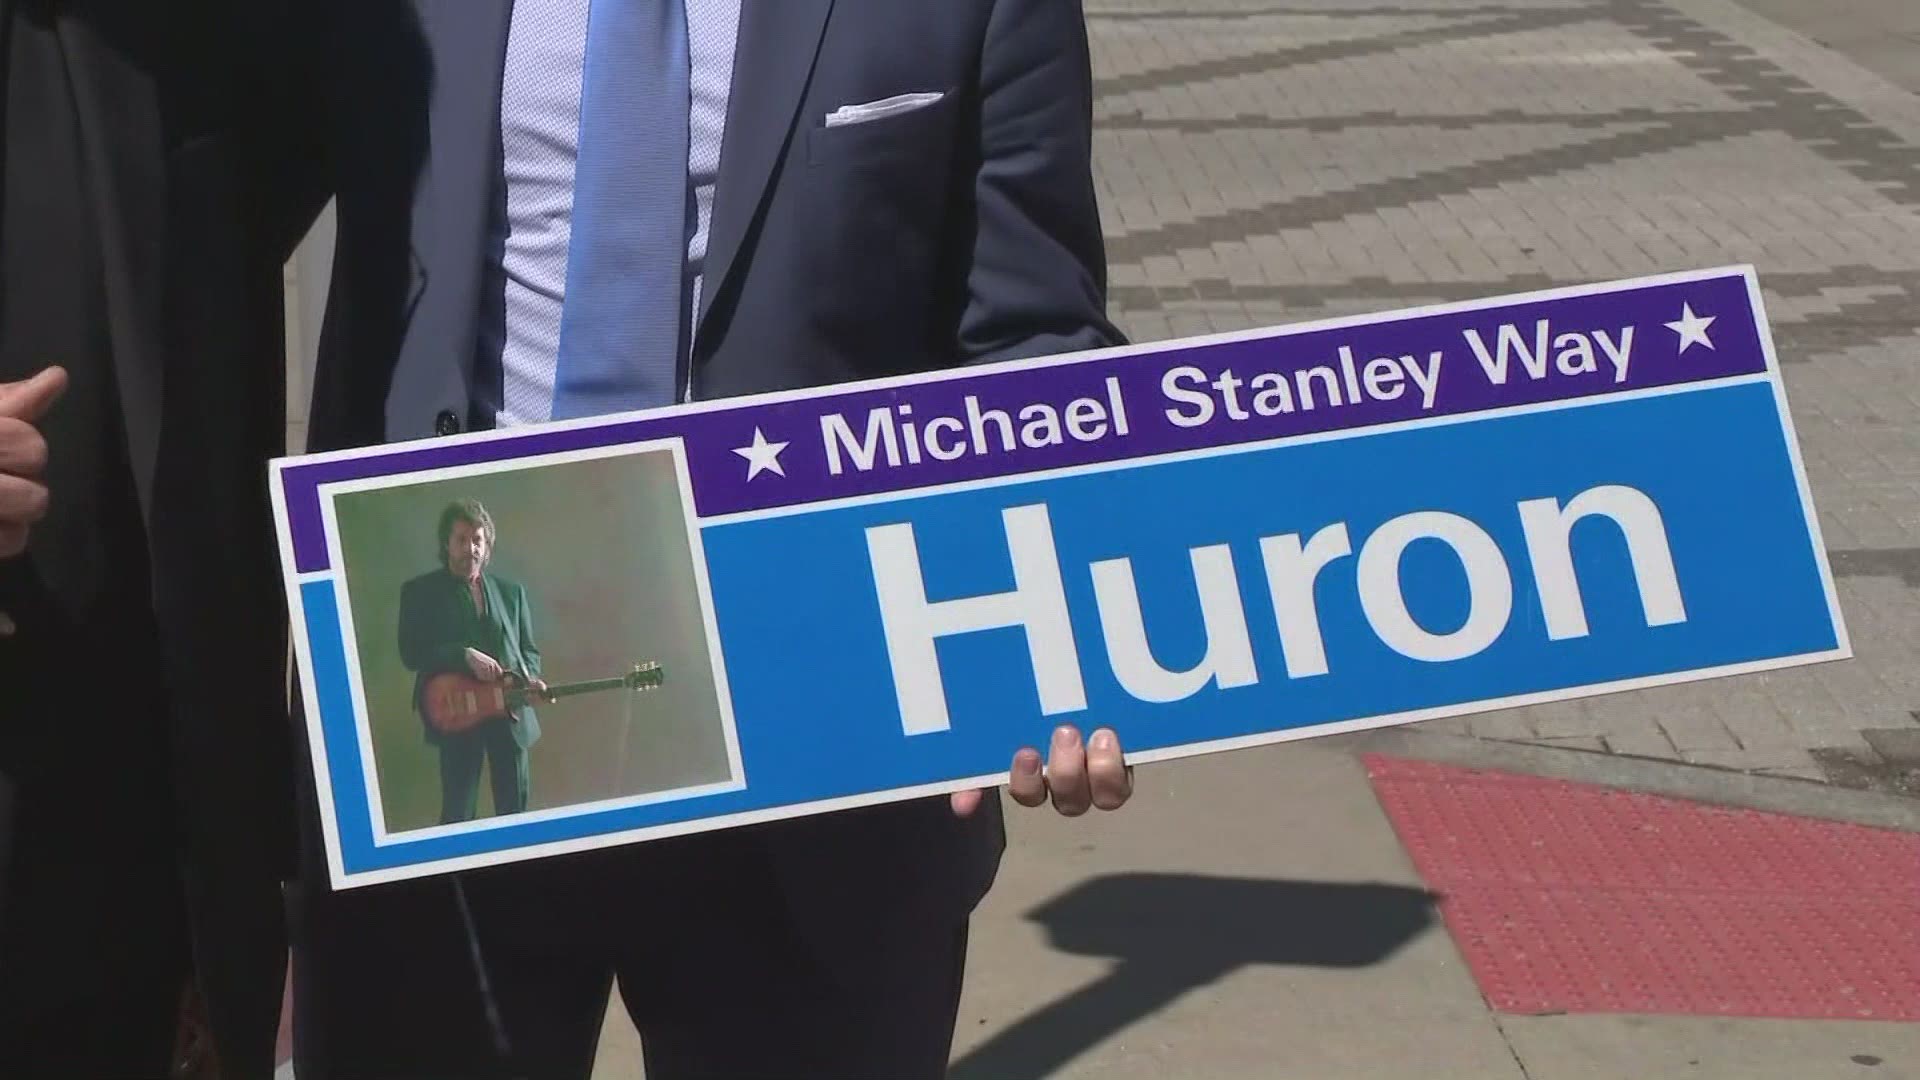 June 11, 2019: The rock ‘n’ roll city is paying special tribute to one of its own hometown stars. The corner of Euclid and Huron was given a new name Tuesday in honor of Cleveland native Michael Stanley… Welcome to 'Michael Stanley Way.'